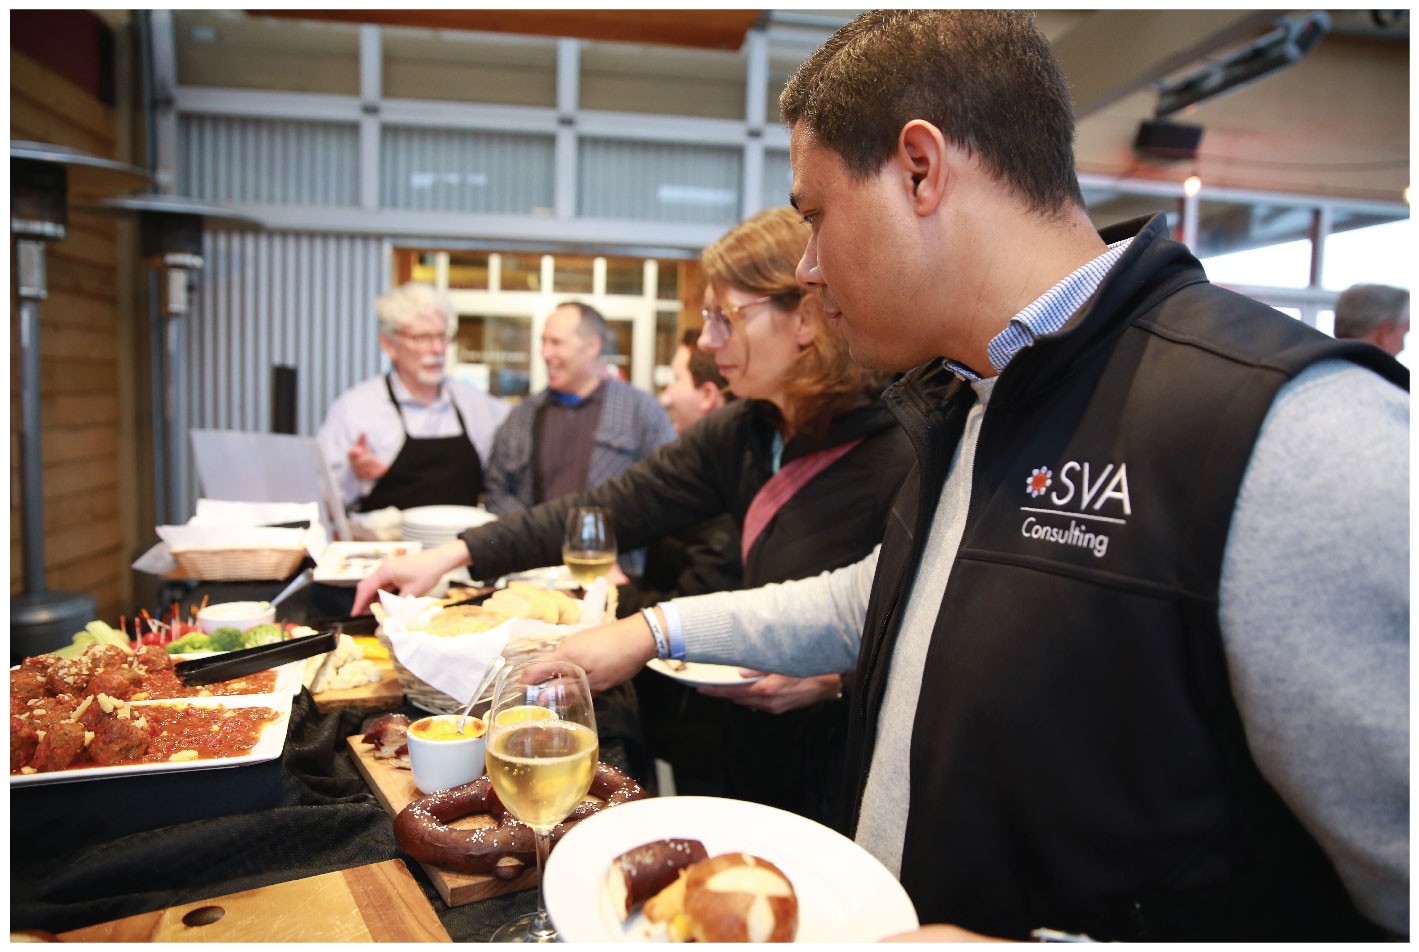 SVA employees enjoying a meal together.